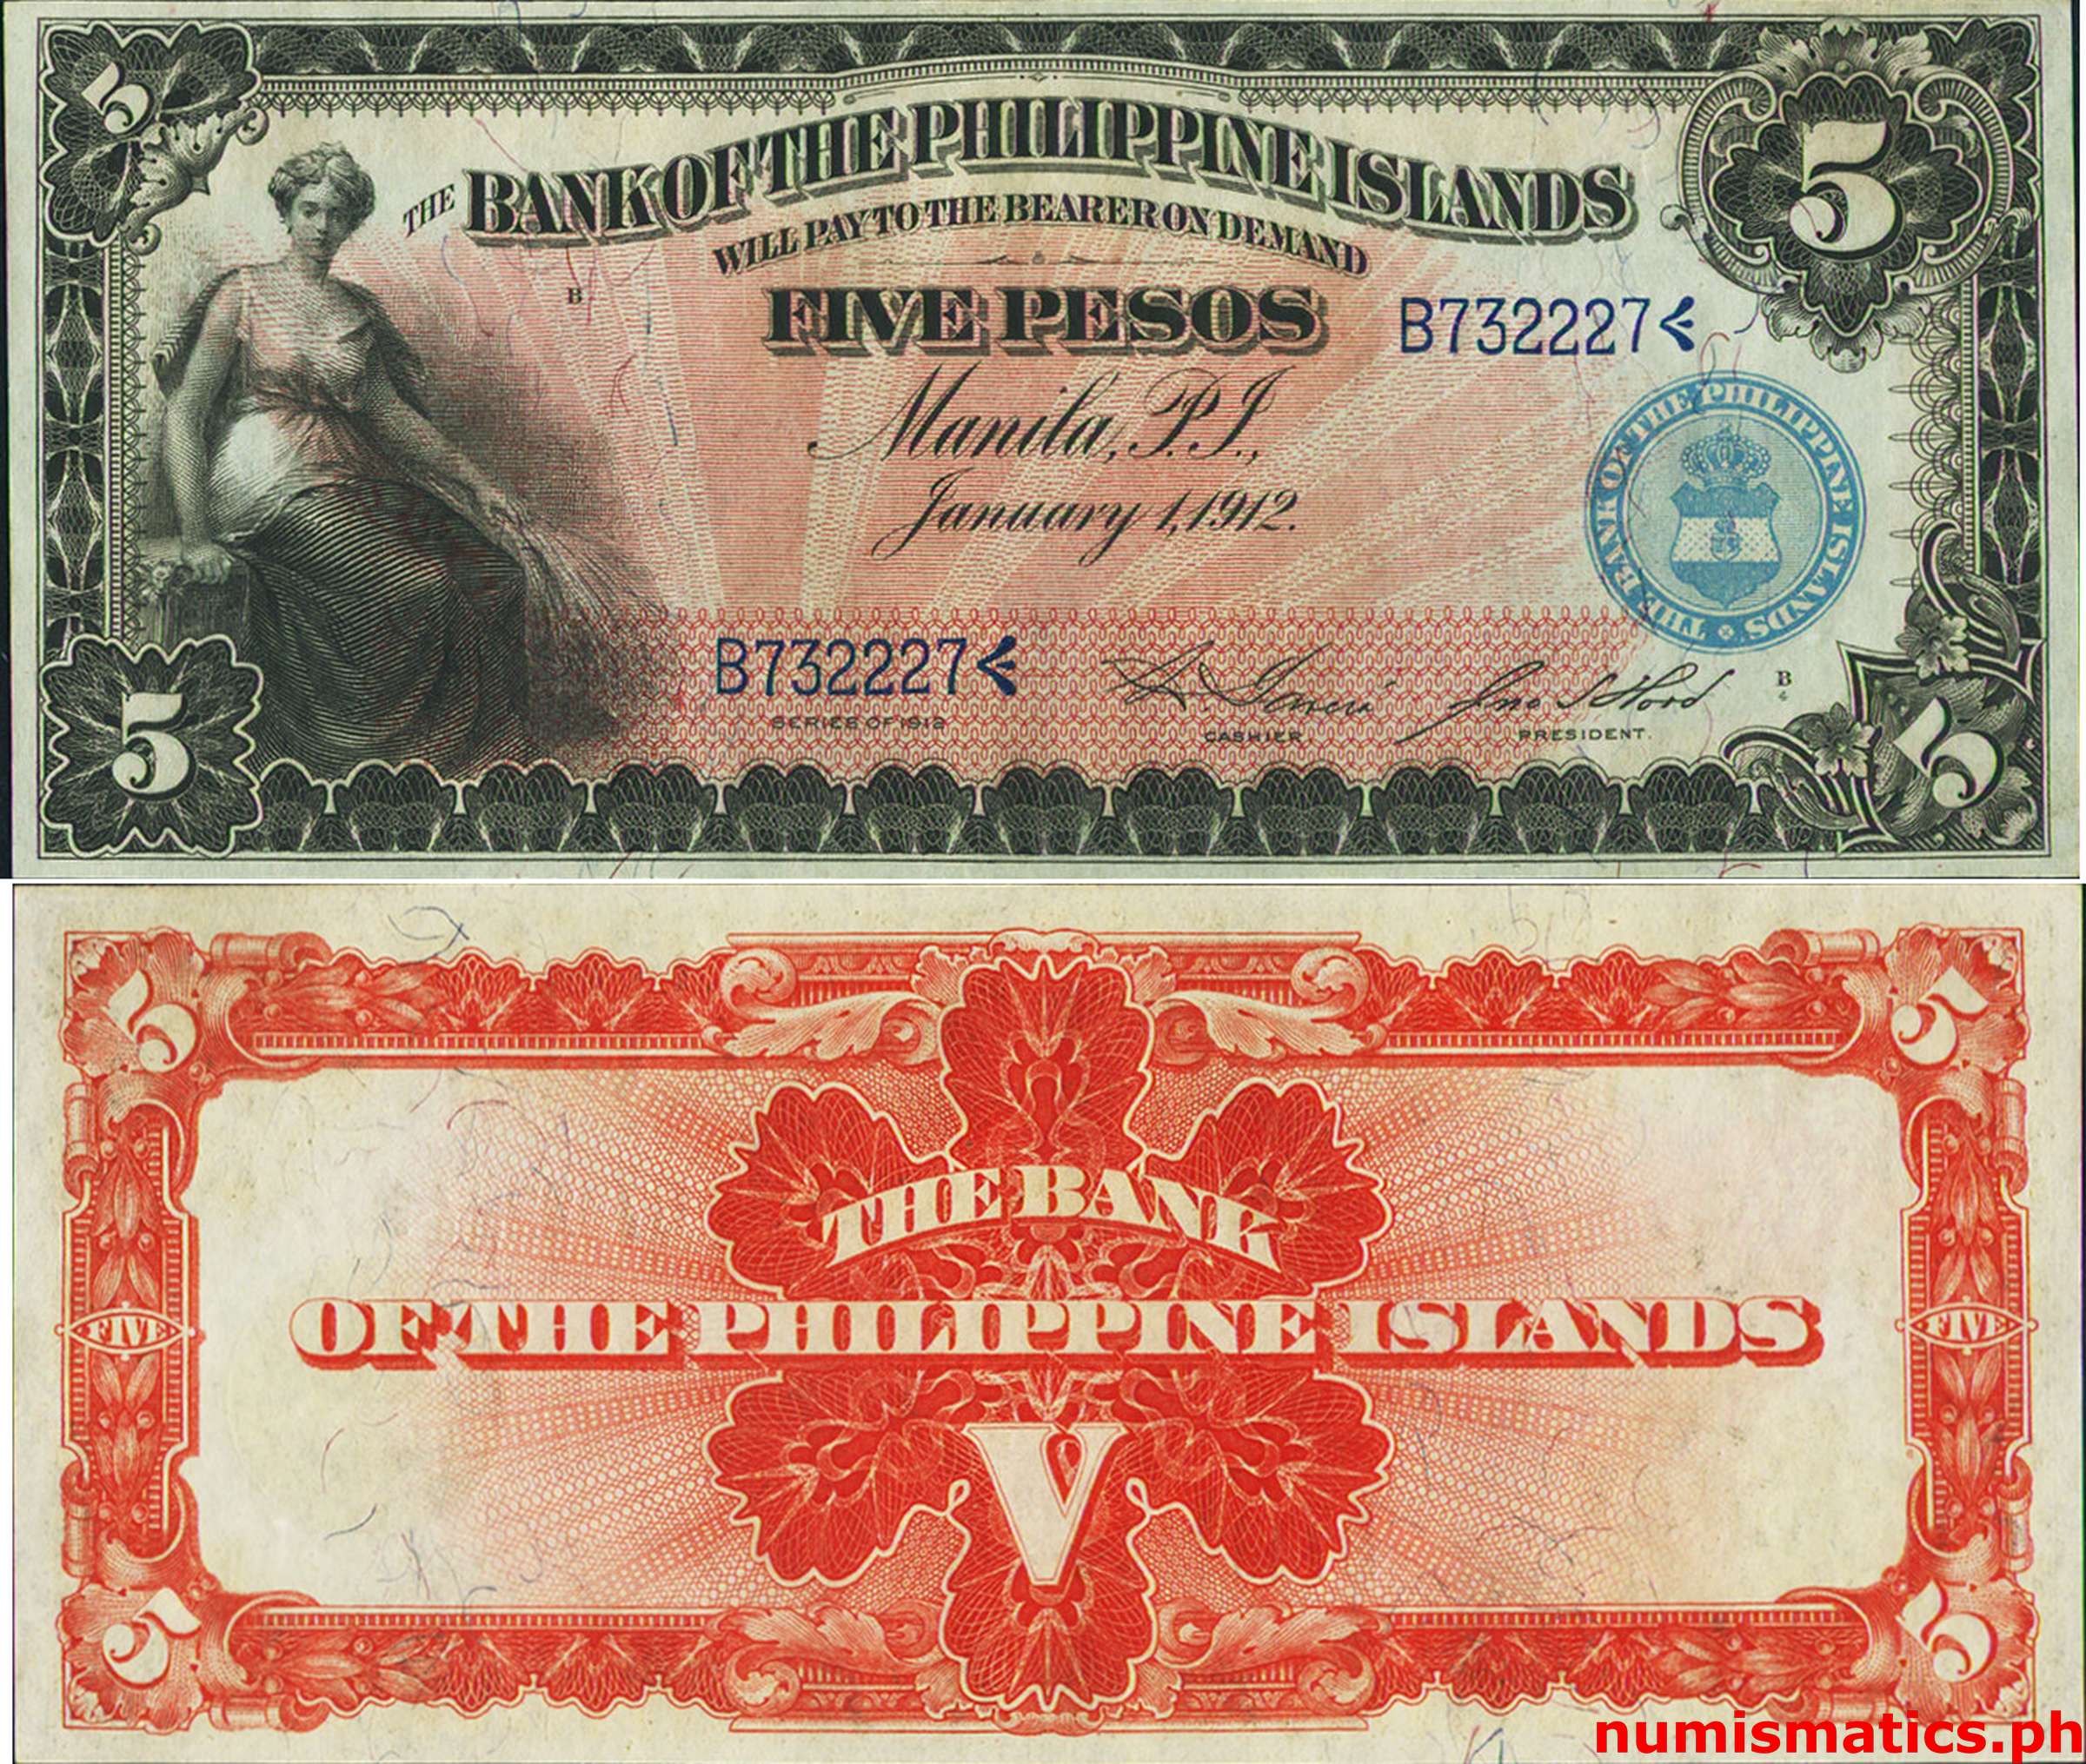 1912 5 Pesos Garcia - Hord Bank of the Philippine Islands Circulating Note